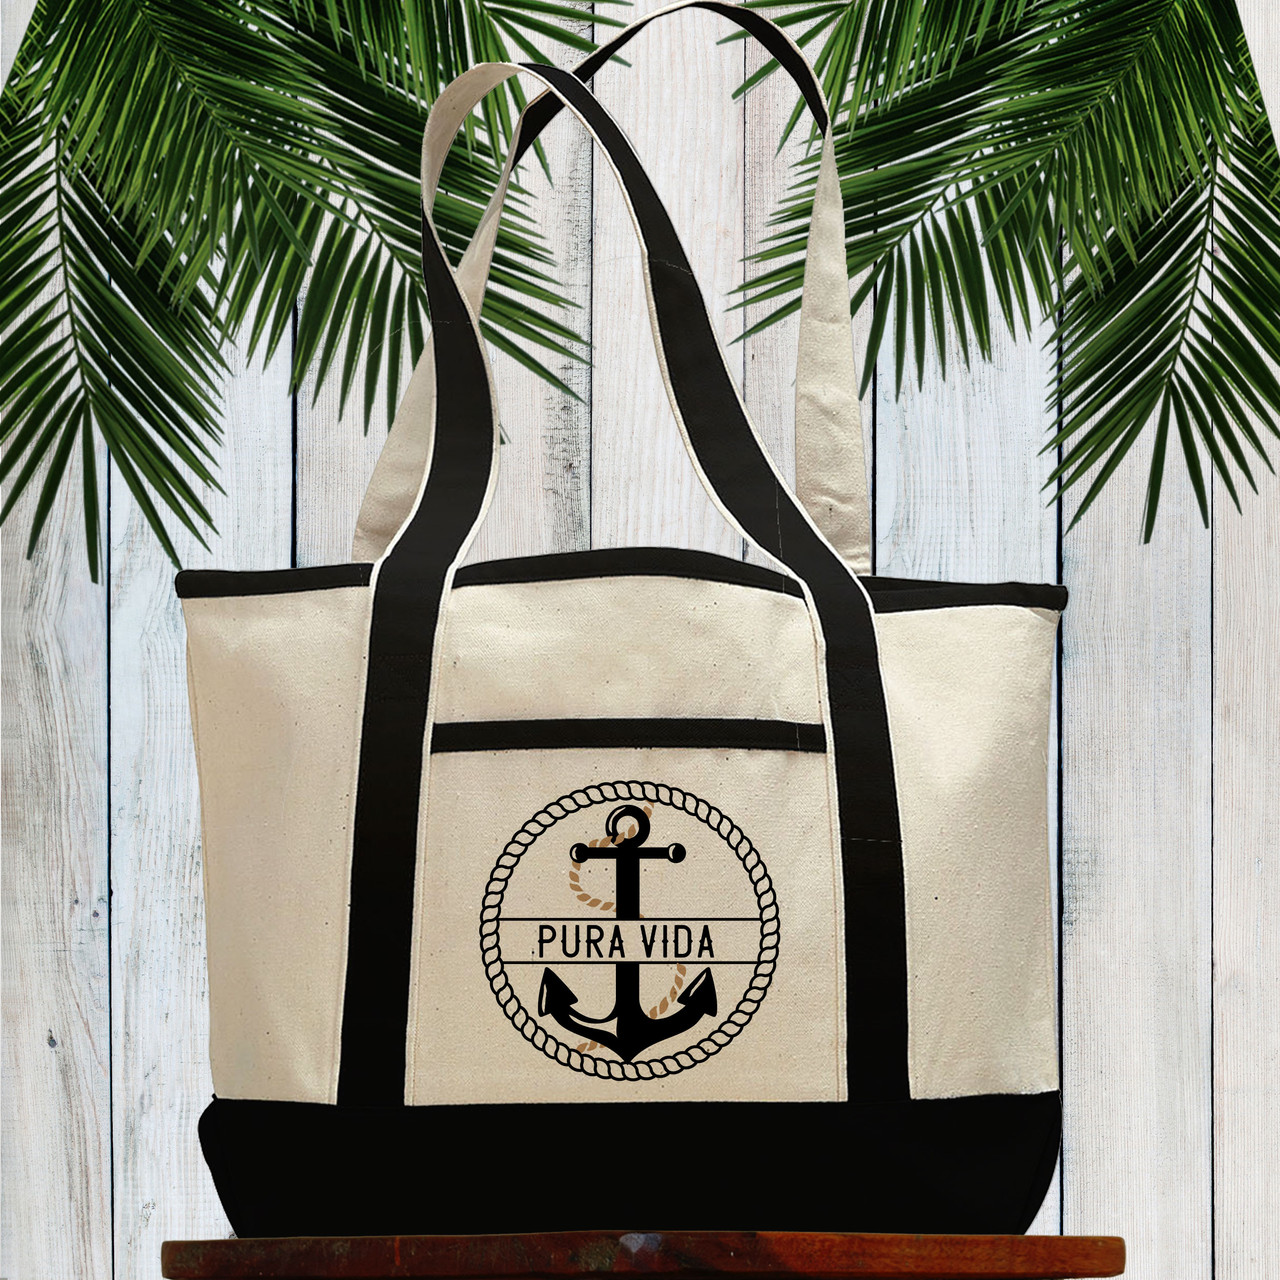  Monogrammed 3 Initial Zippered Tote Bag : Handmade Products